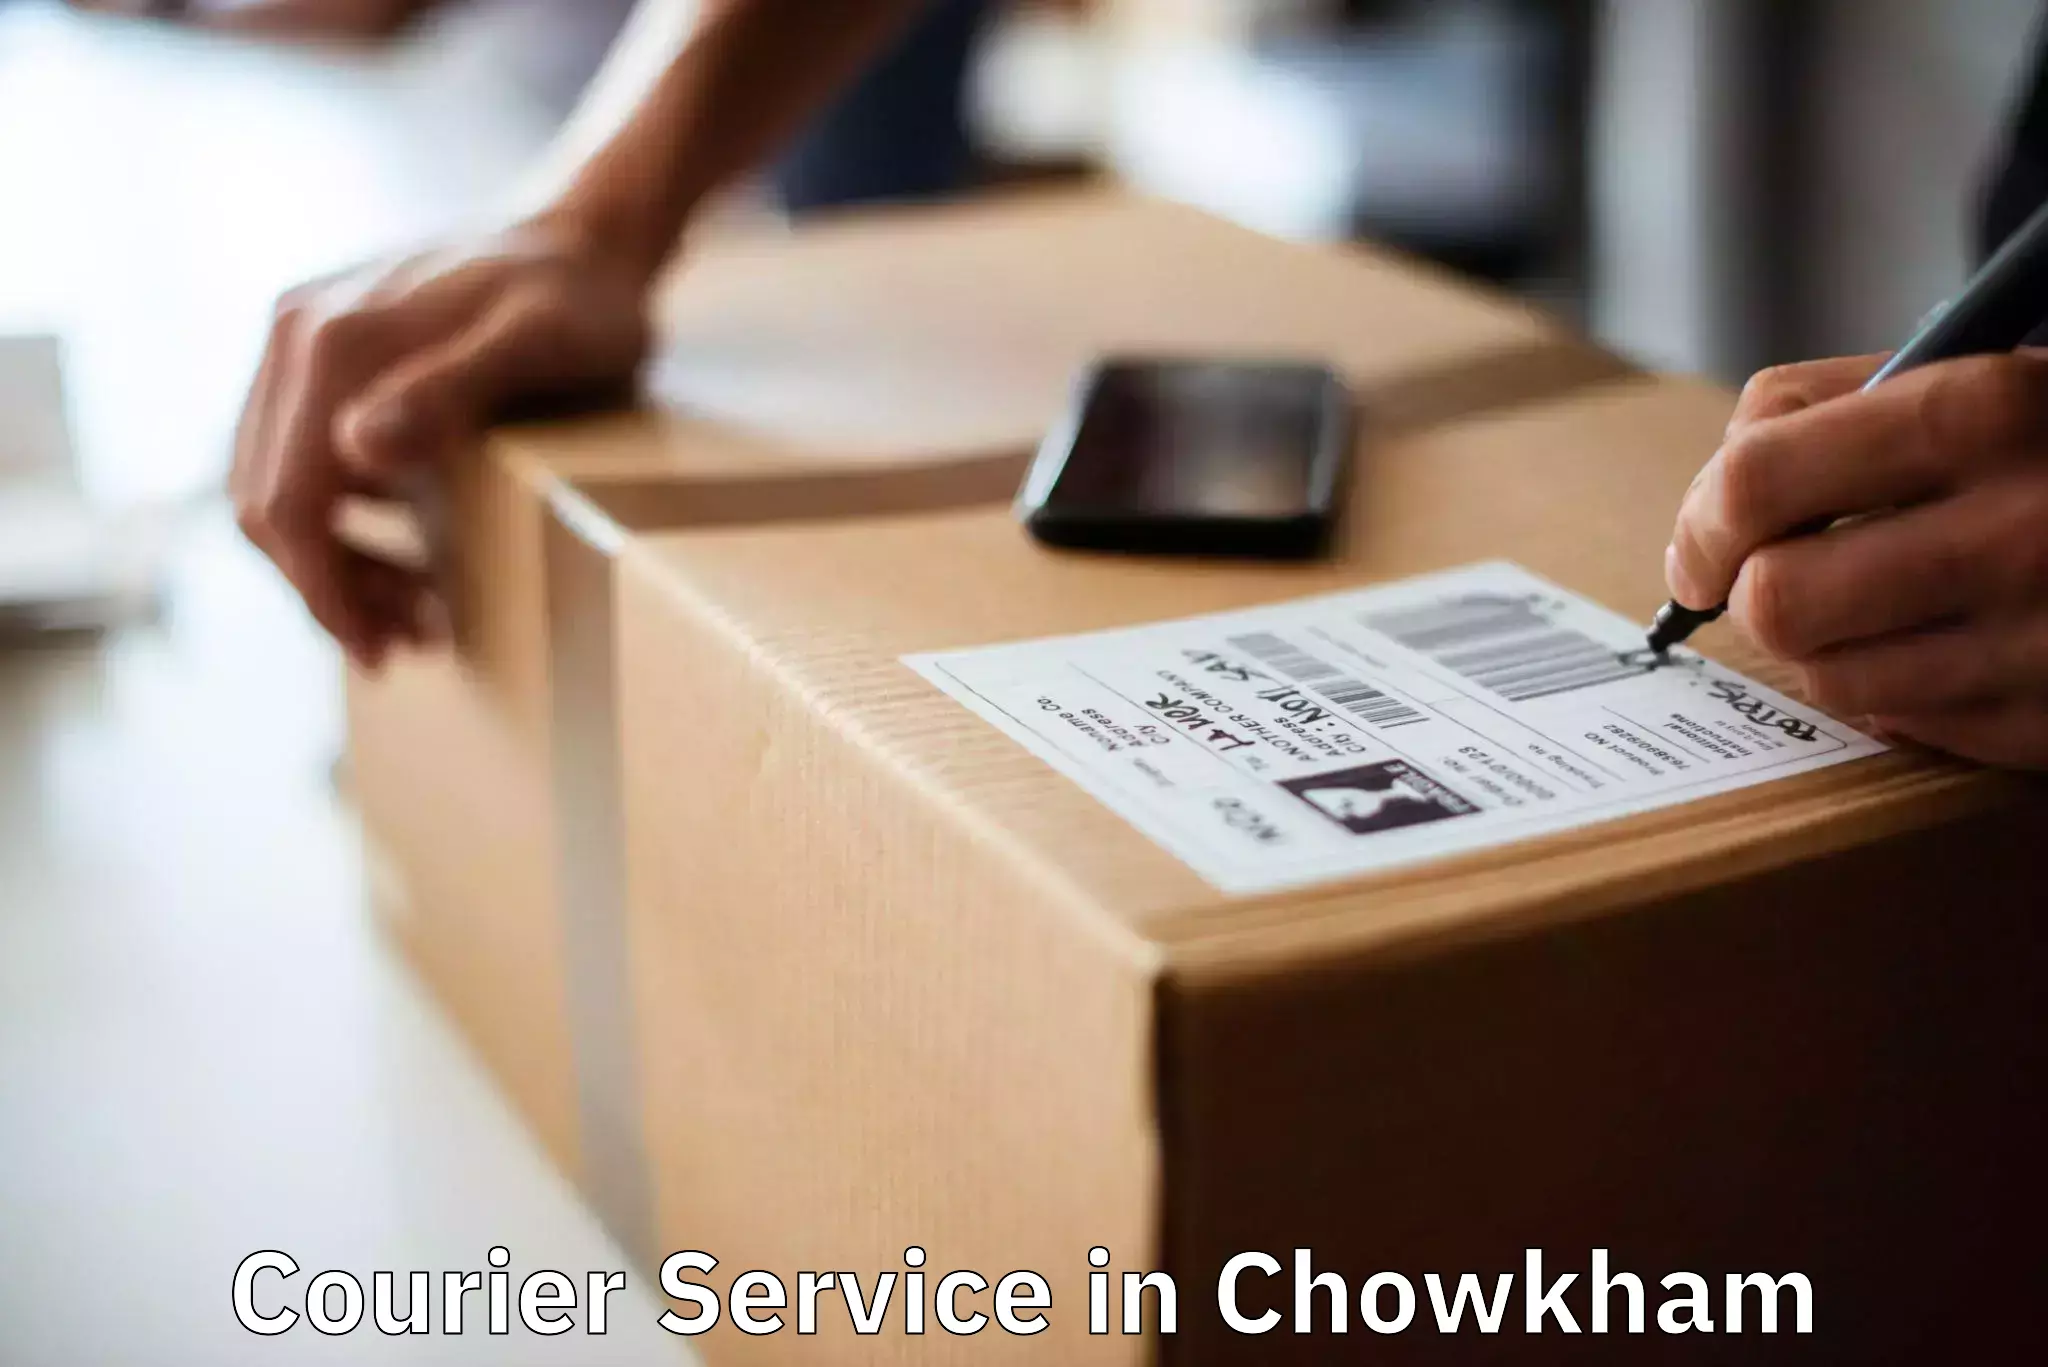 Logistics solutions in Chowkham